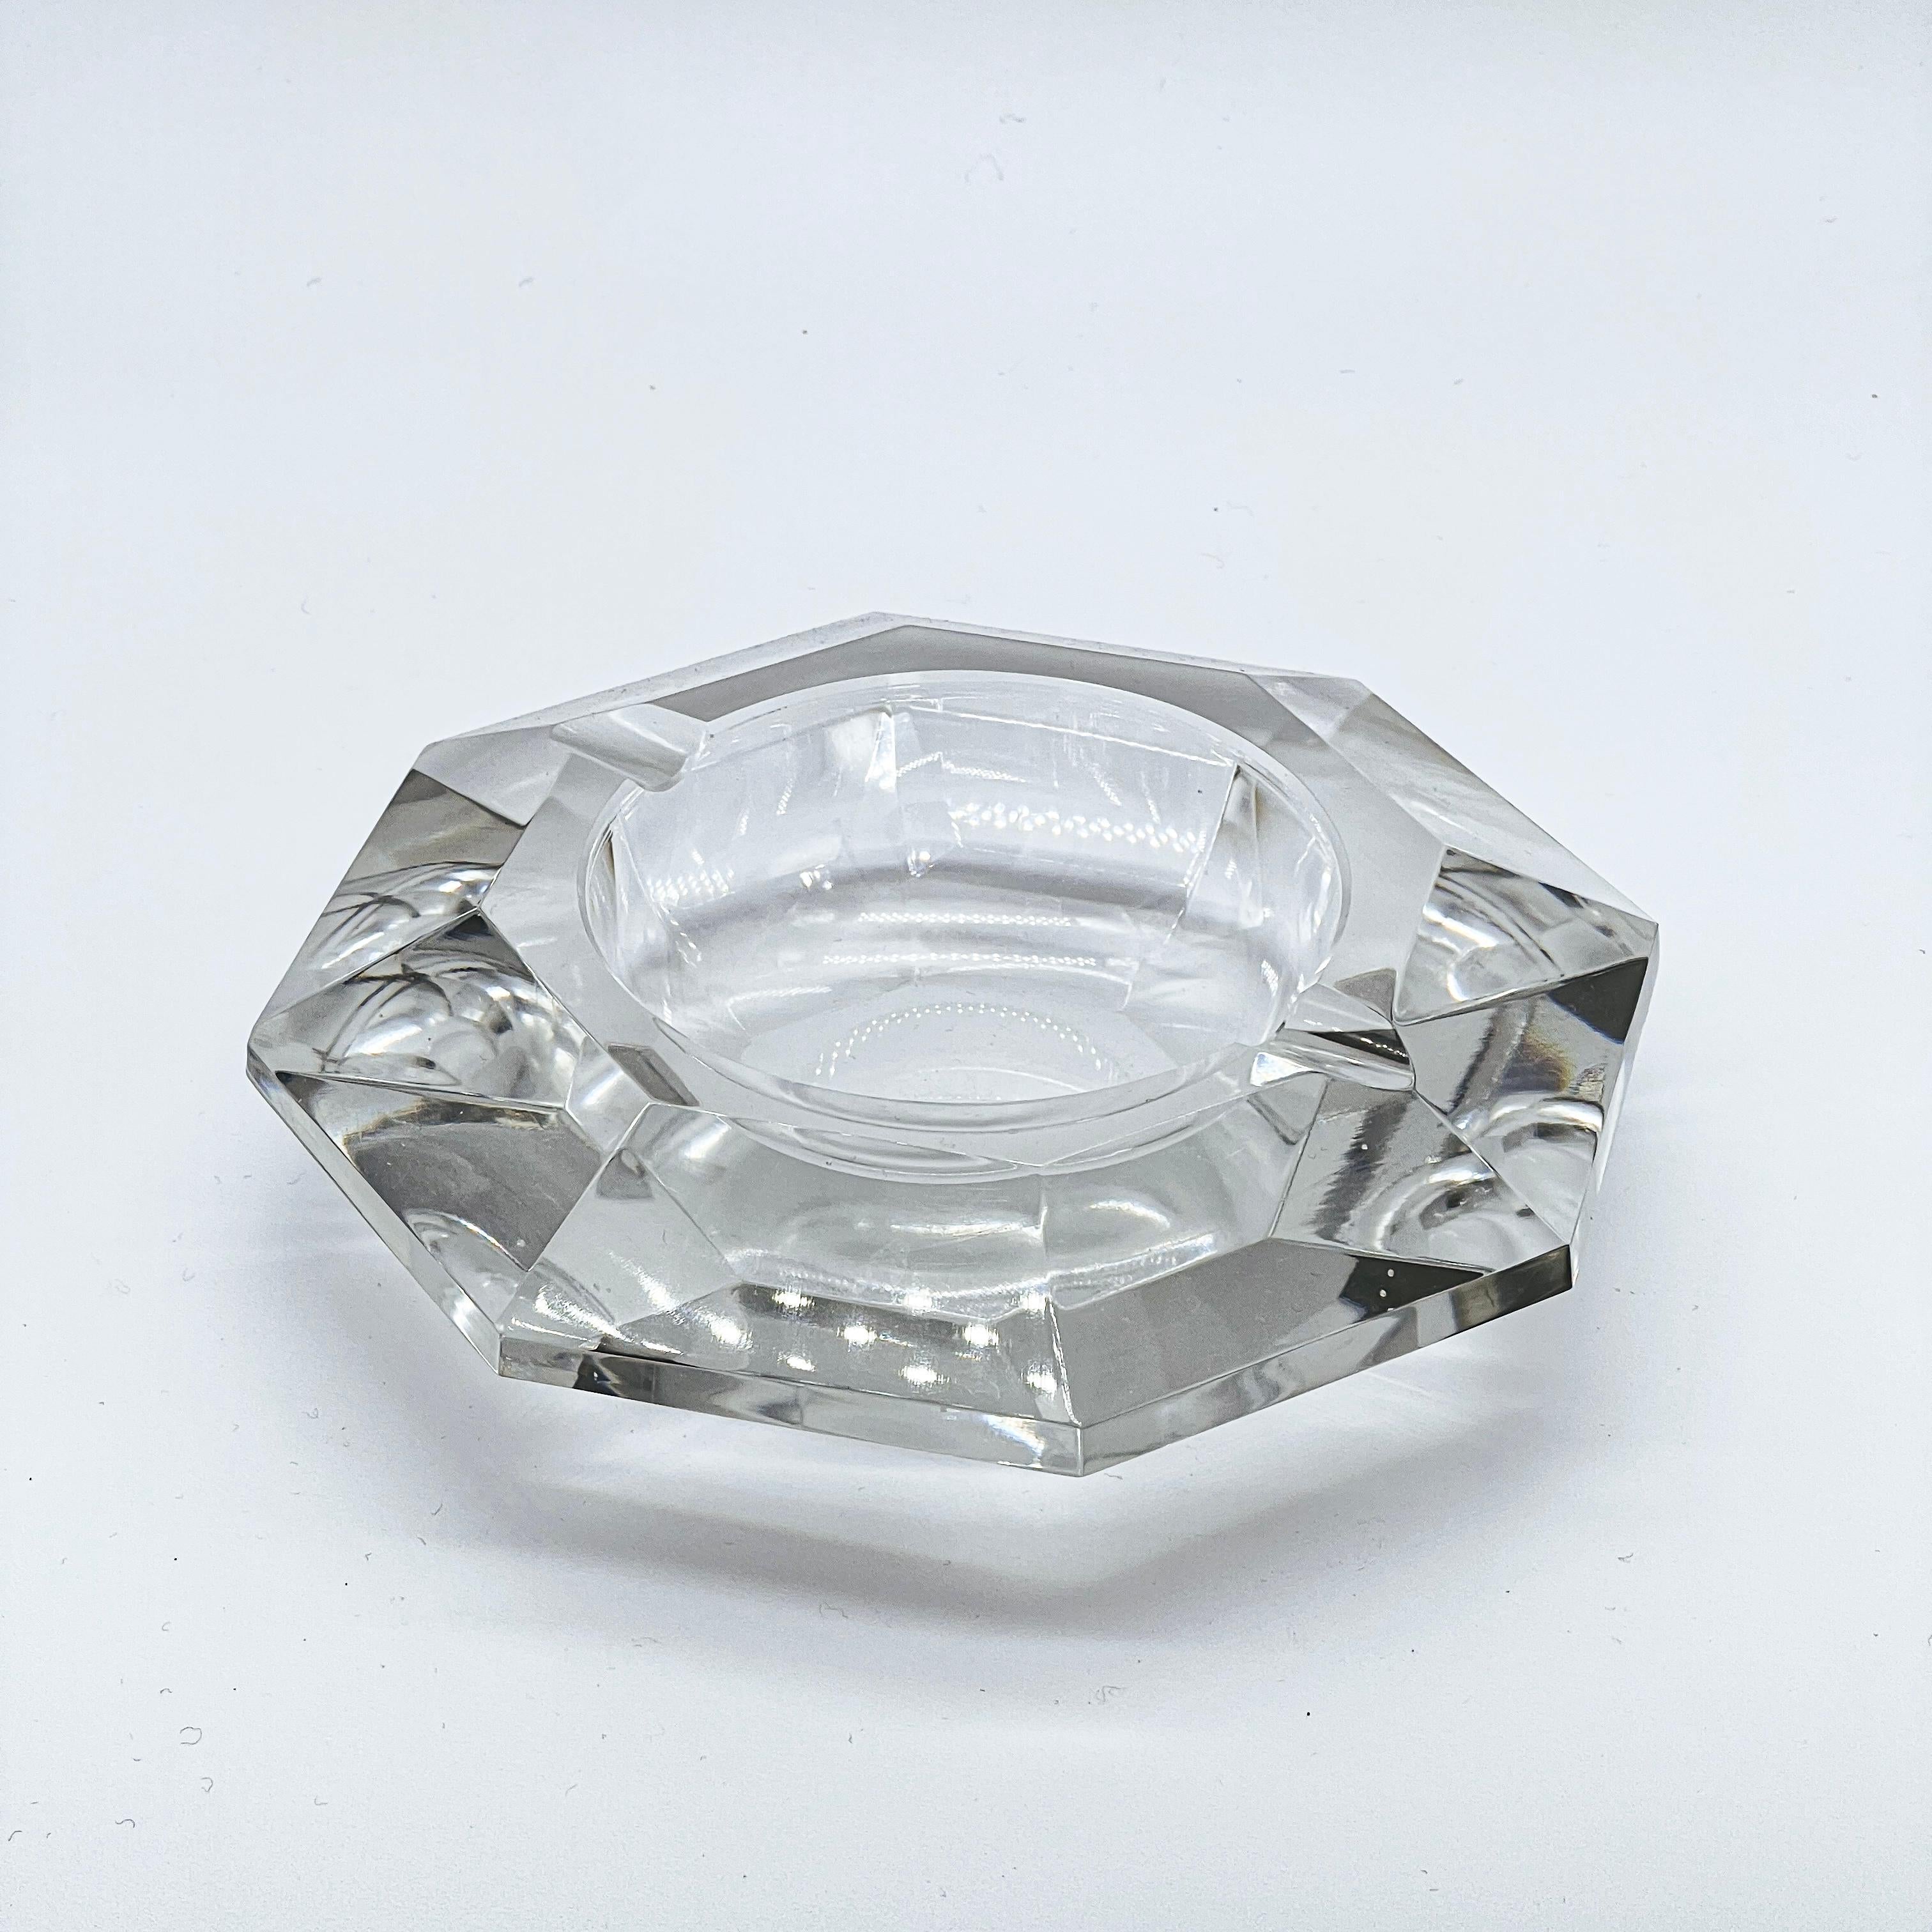 Vintage diamond-shaped cut crystal ashtray, made in clear glass and possibly of French origin. Has two grooves to put down cigarettes if it's used as an ashtray.
Preserved in very good conditions, it shows only minor scratches, totally expectable